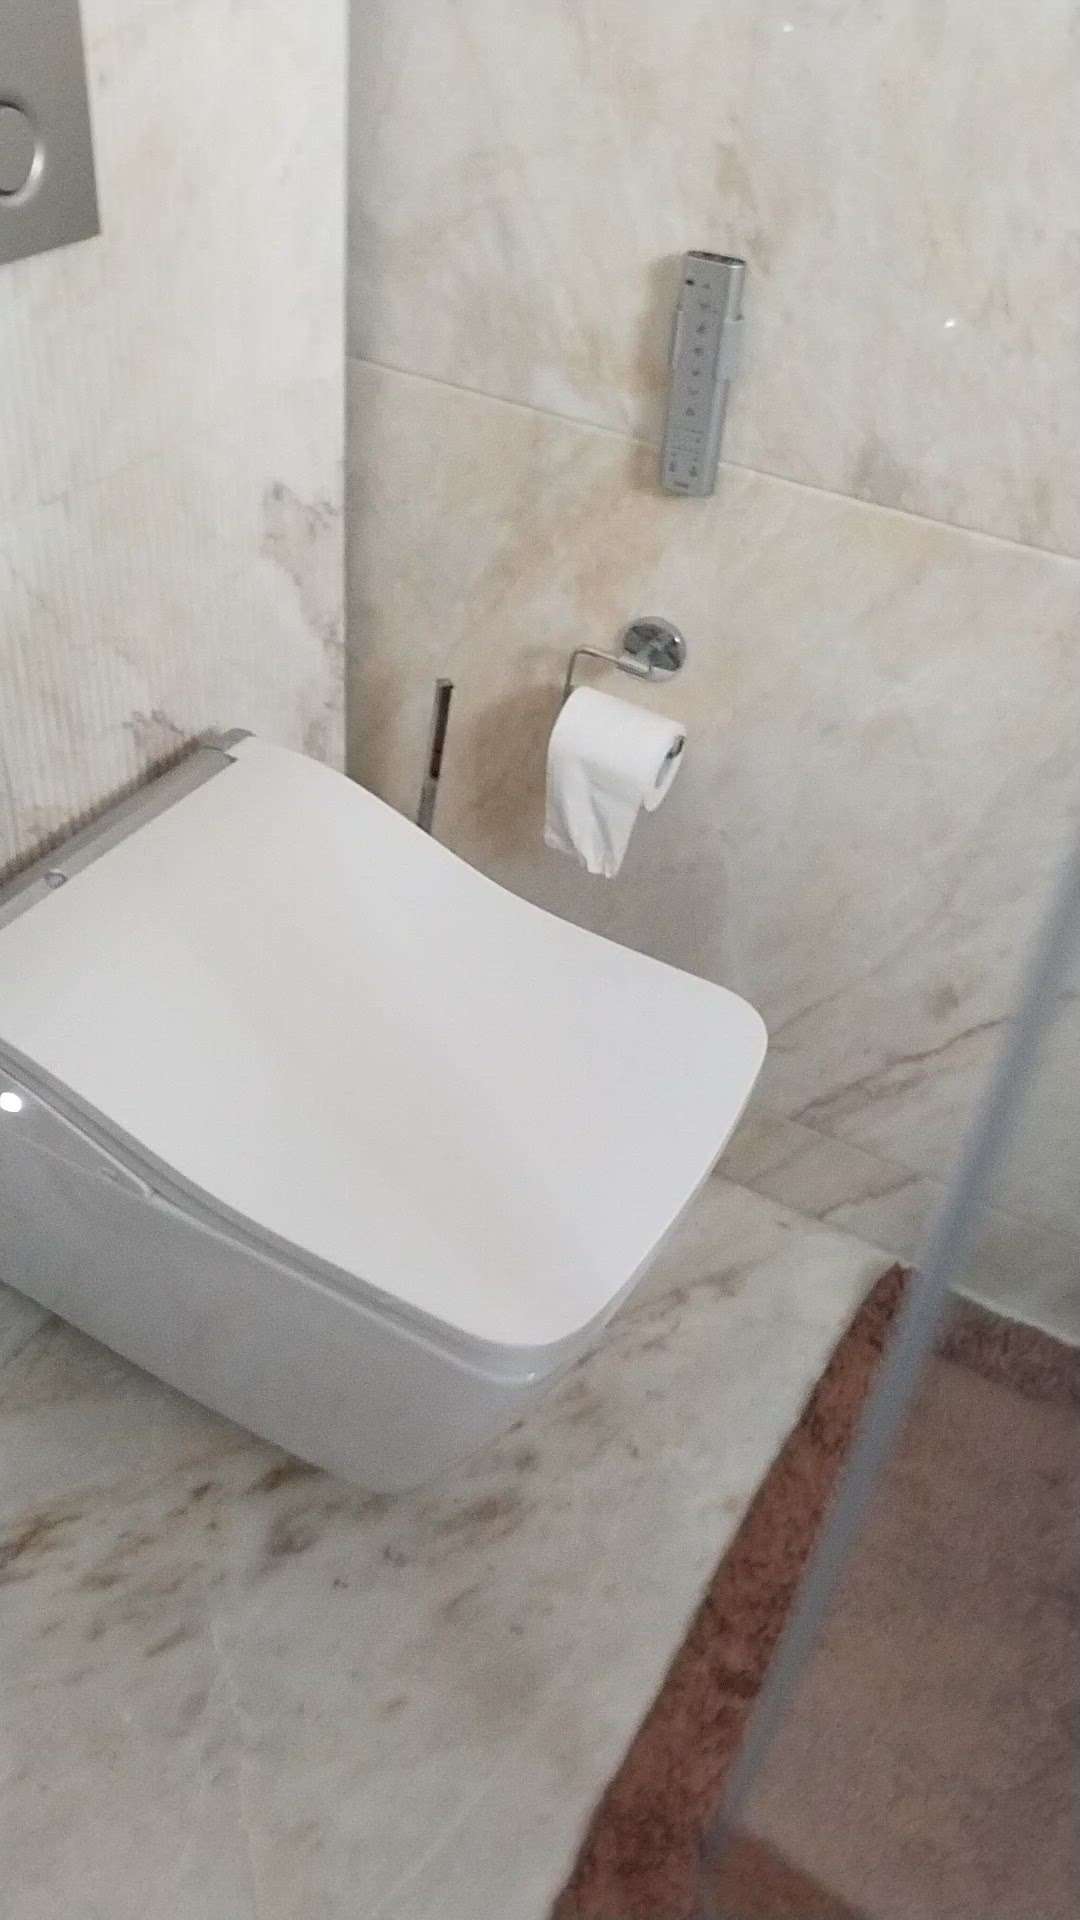 Toto electronic WC seat with great experience 😍 #Plumber  # #Plumbing